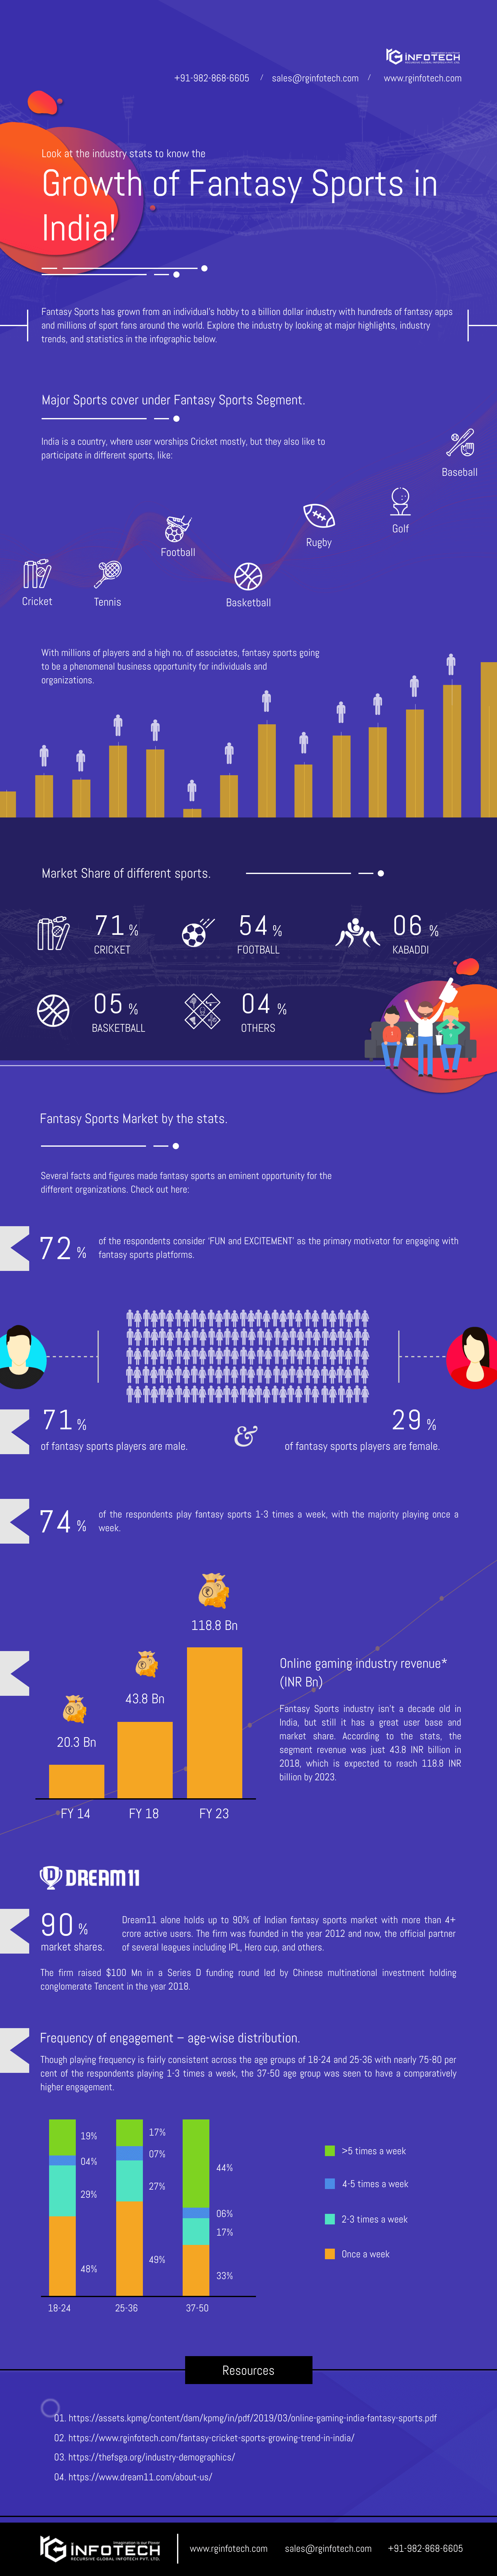 Infograhics - growth of fantasy sports in India